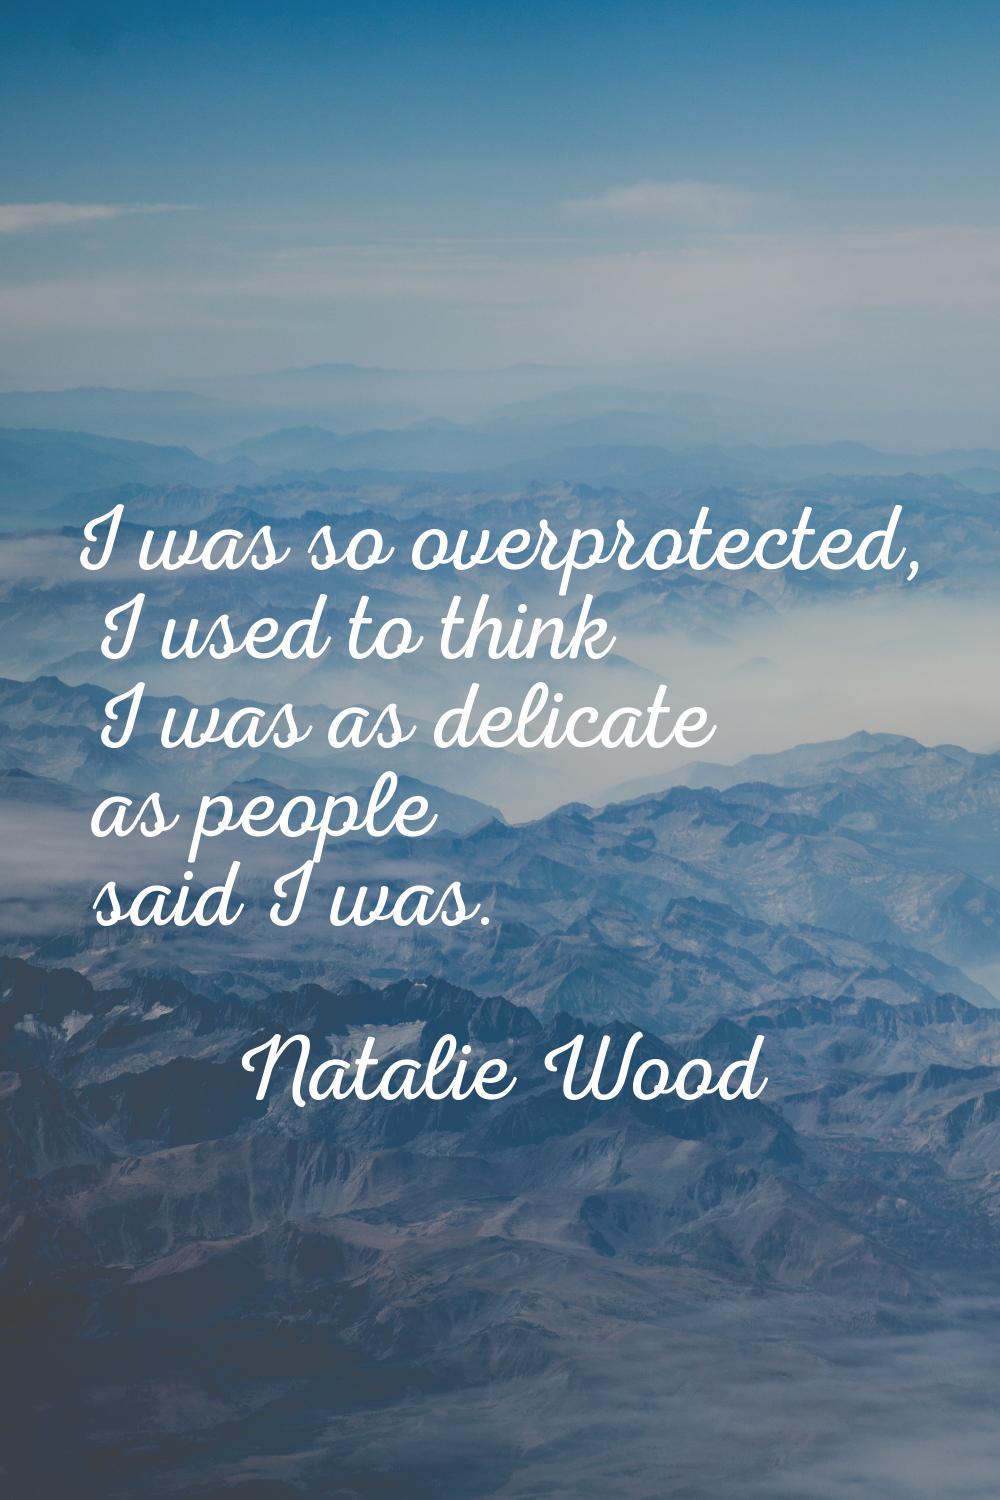 I was so overprotected, I used to think I was as delicate as people said I was.